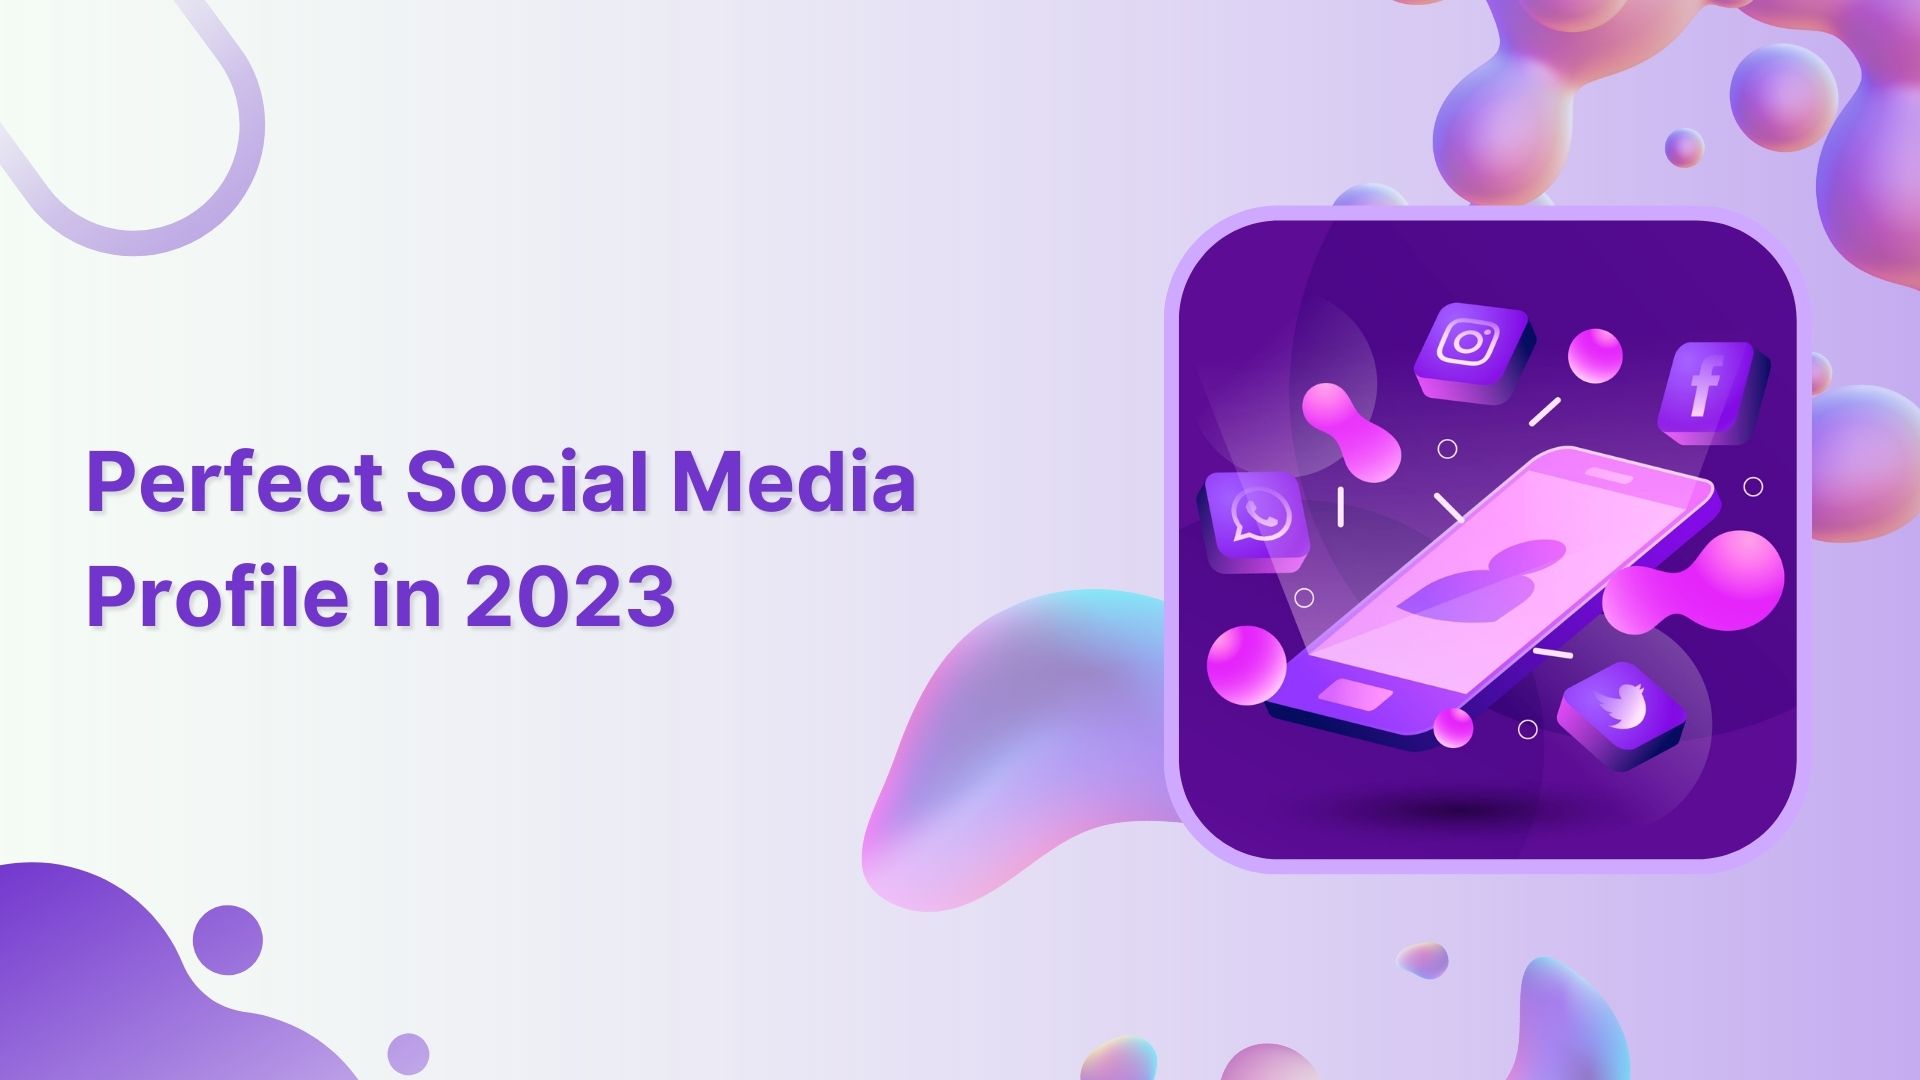 How to Maintain a Perfect Social Media Profile in 2023